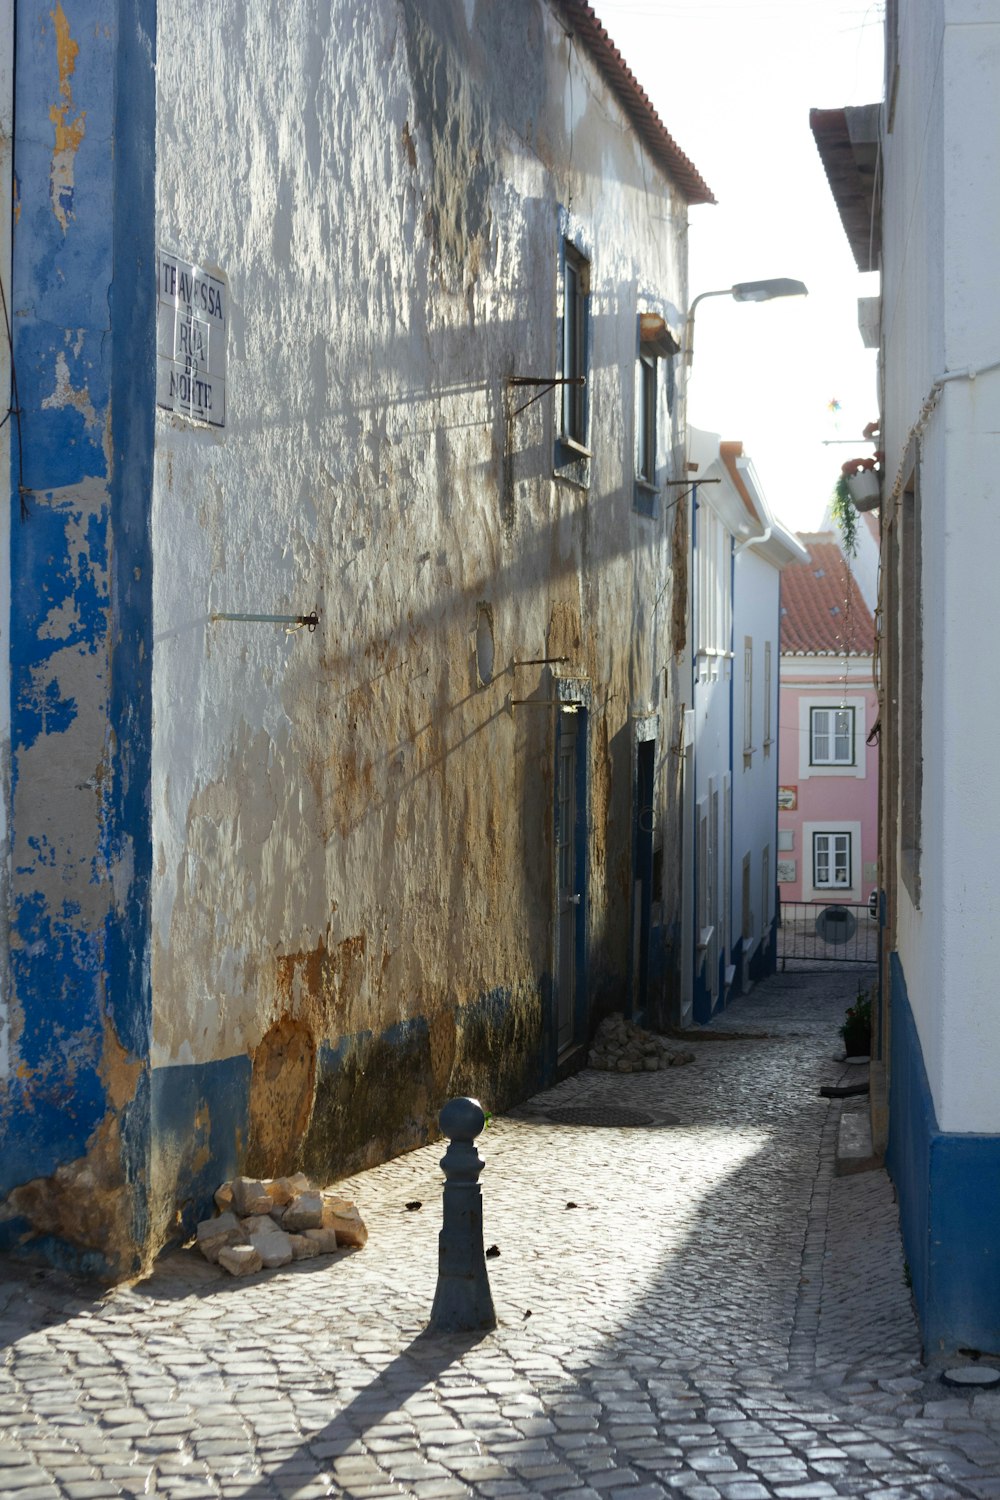 a street with a blue and white building and a black fire hydrant